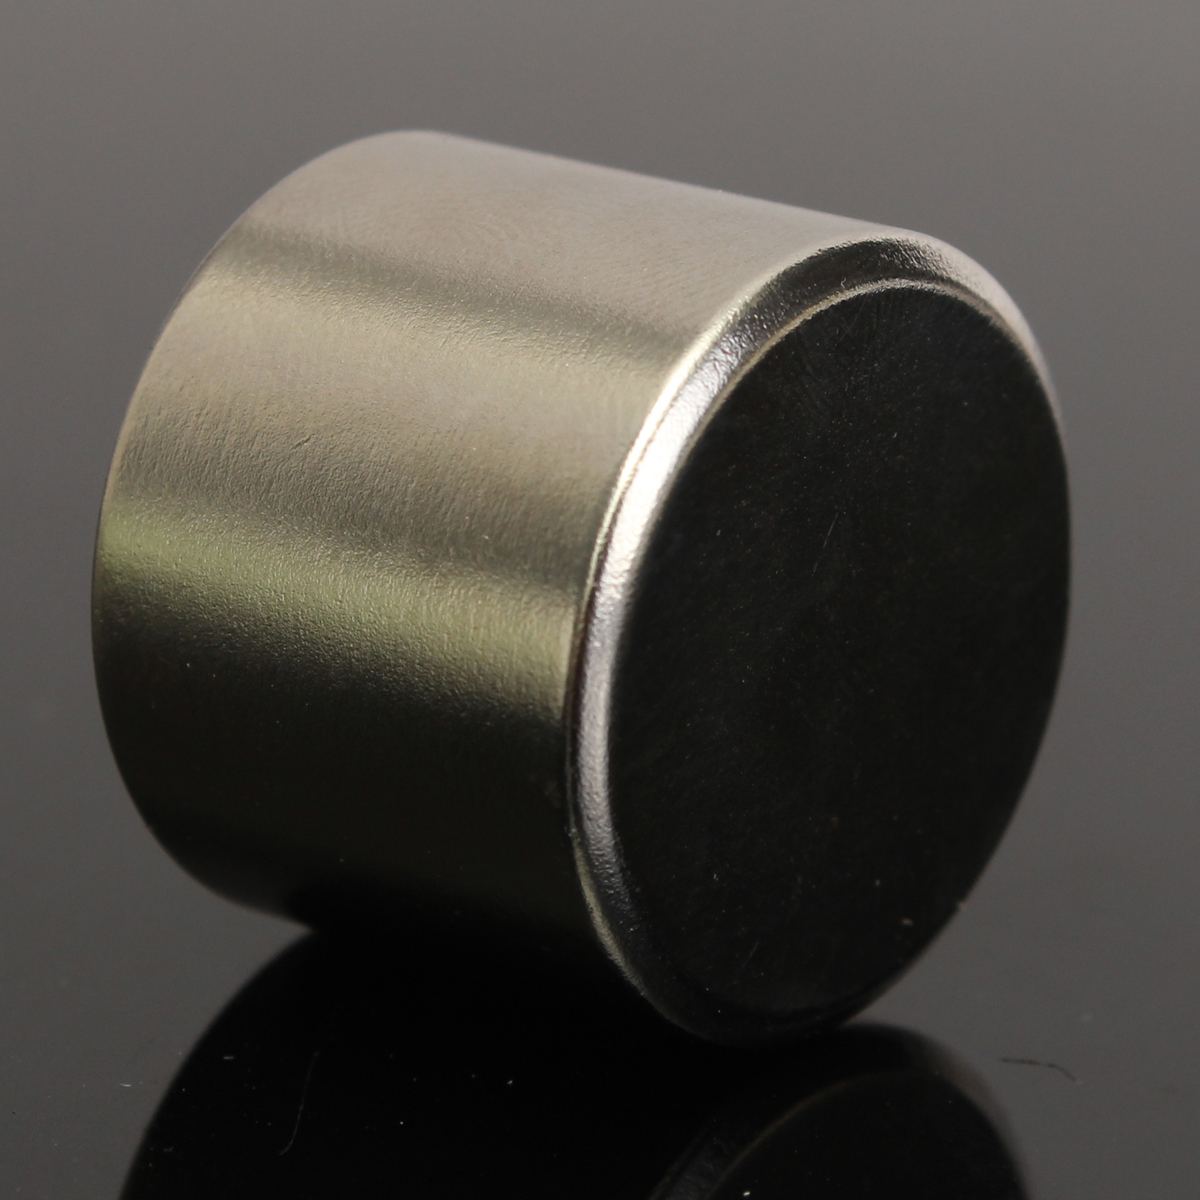 round rare earth magnets